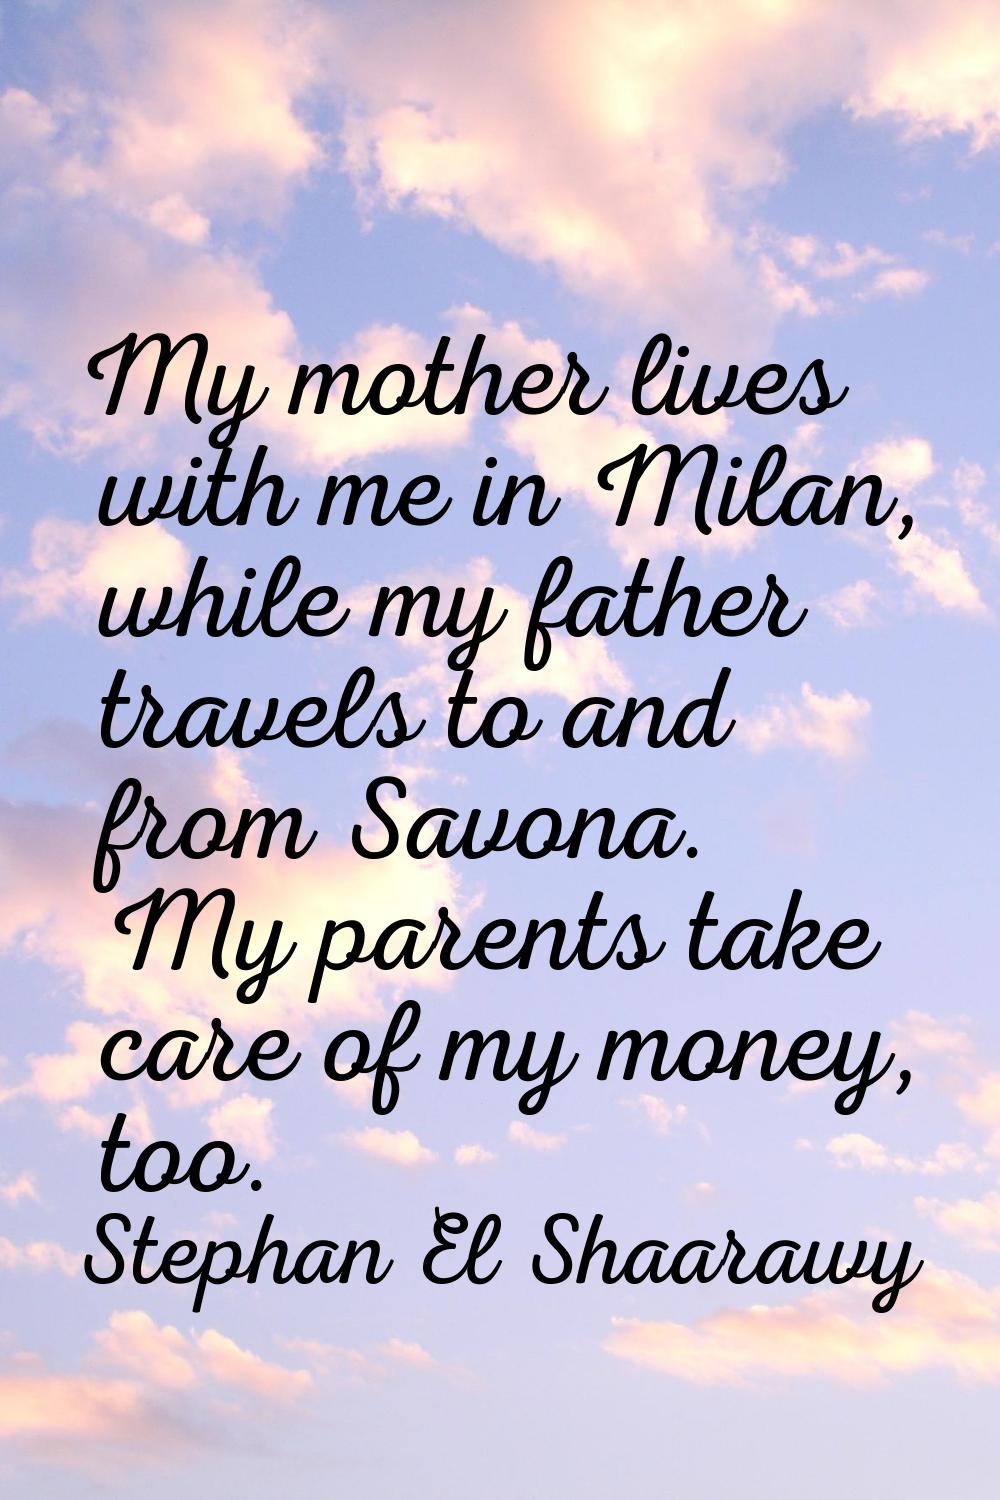 My mother lives with me in Milan, while my father travels to and from Savona. My parents take care 